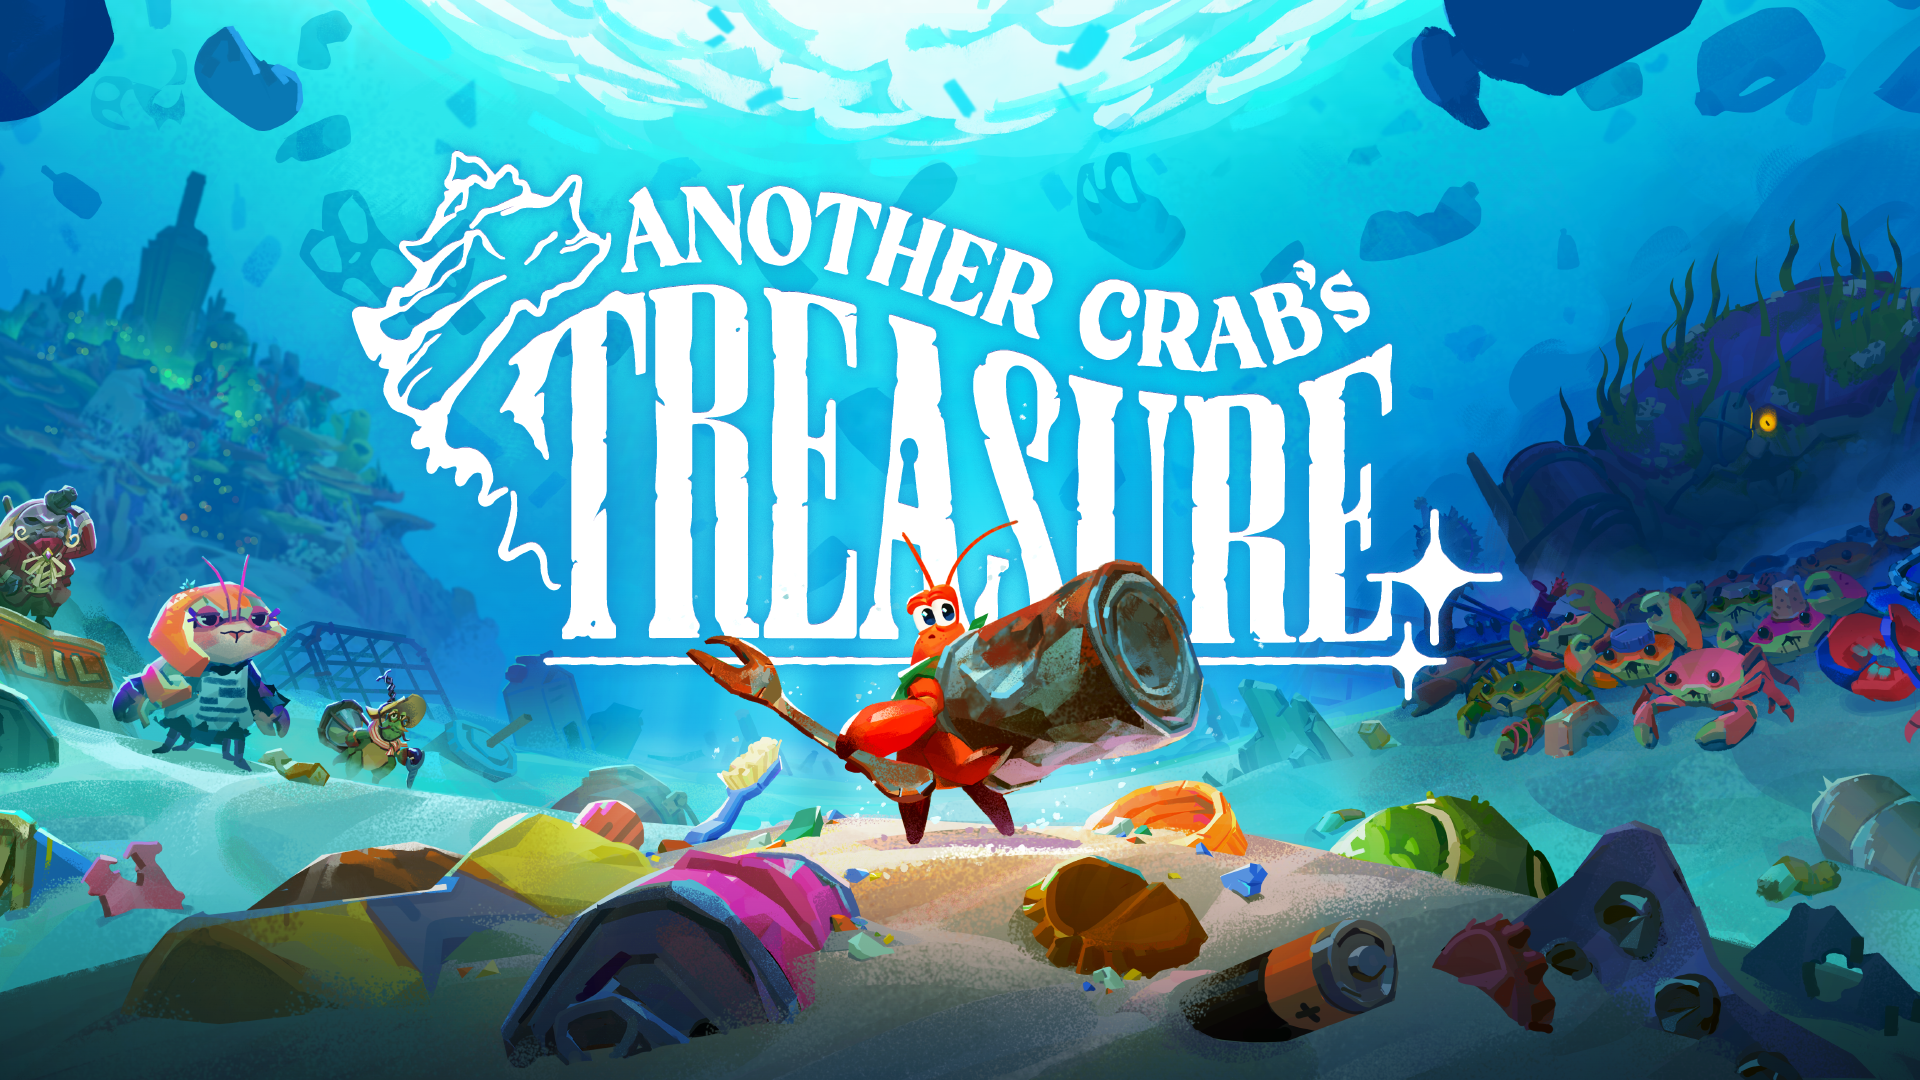 Another Crab’s Treasure is a soulslike adventure starring a hermit crab